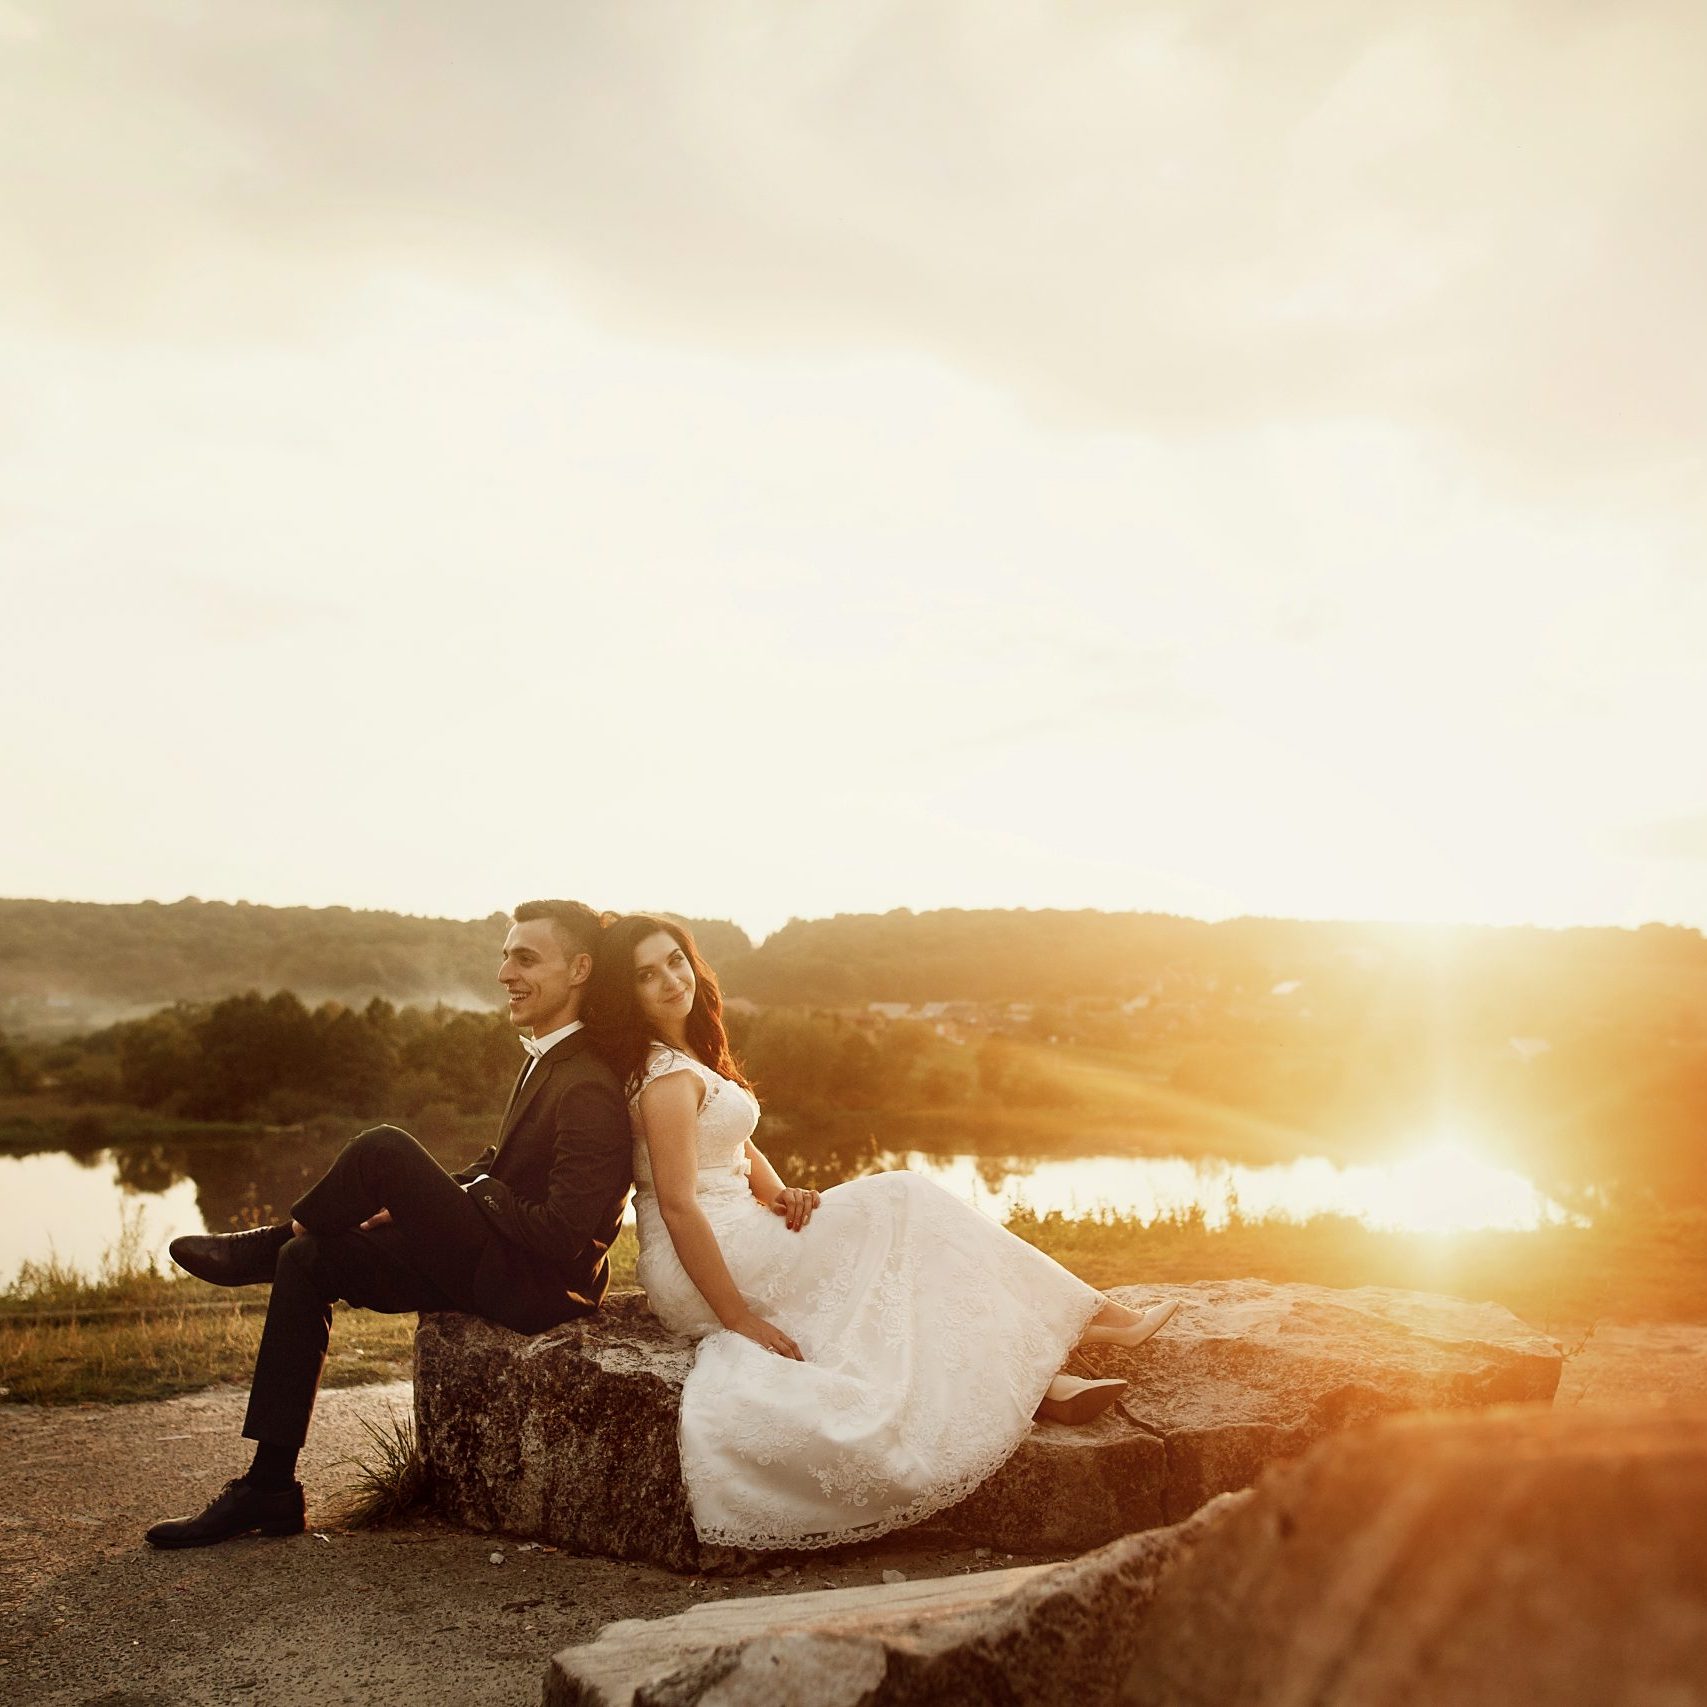 Romantic couple of newlyweds resting on stone bench at sunset field near lake landscape, happy bride leaning against smiling groom outdoors